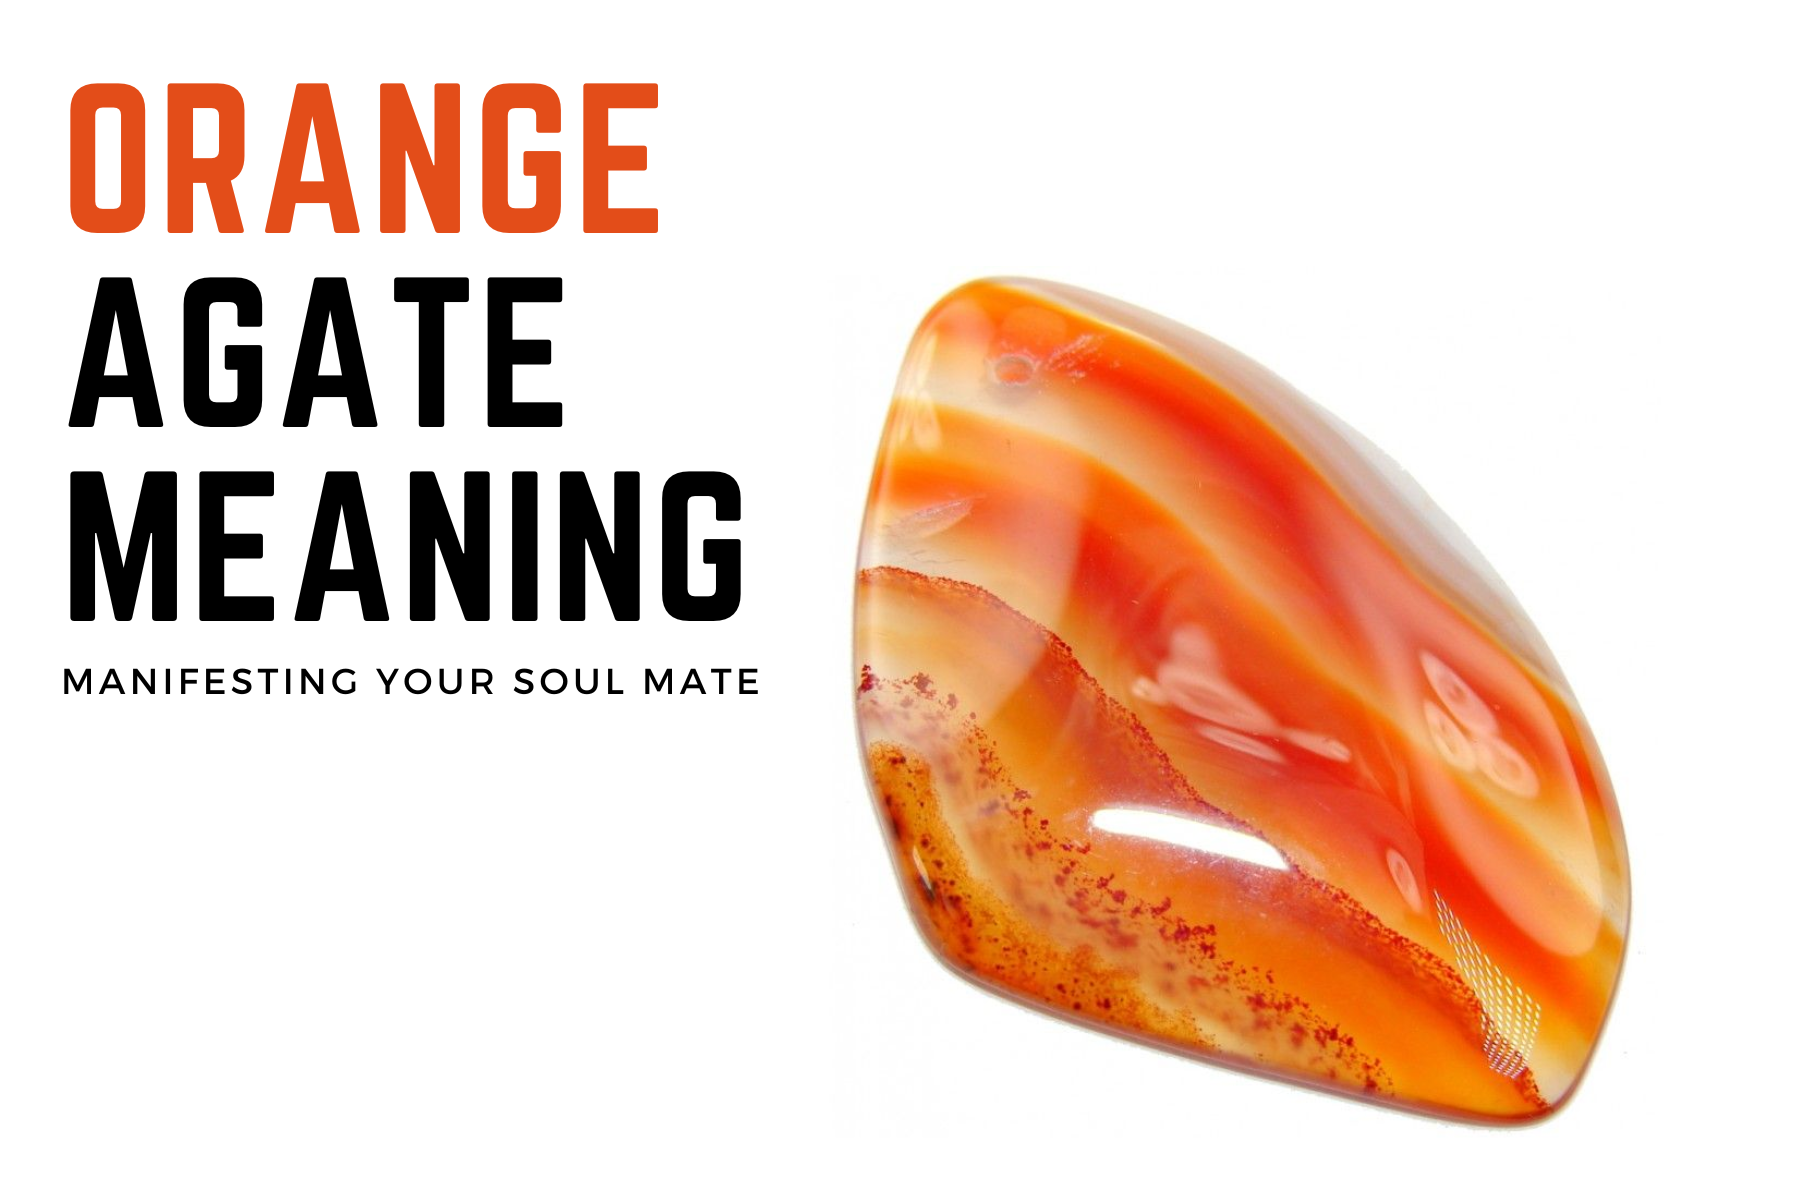 Orange Agate Meaning - Manifesting Your Soul Mate